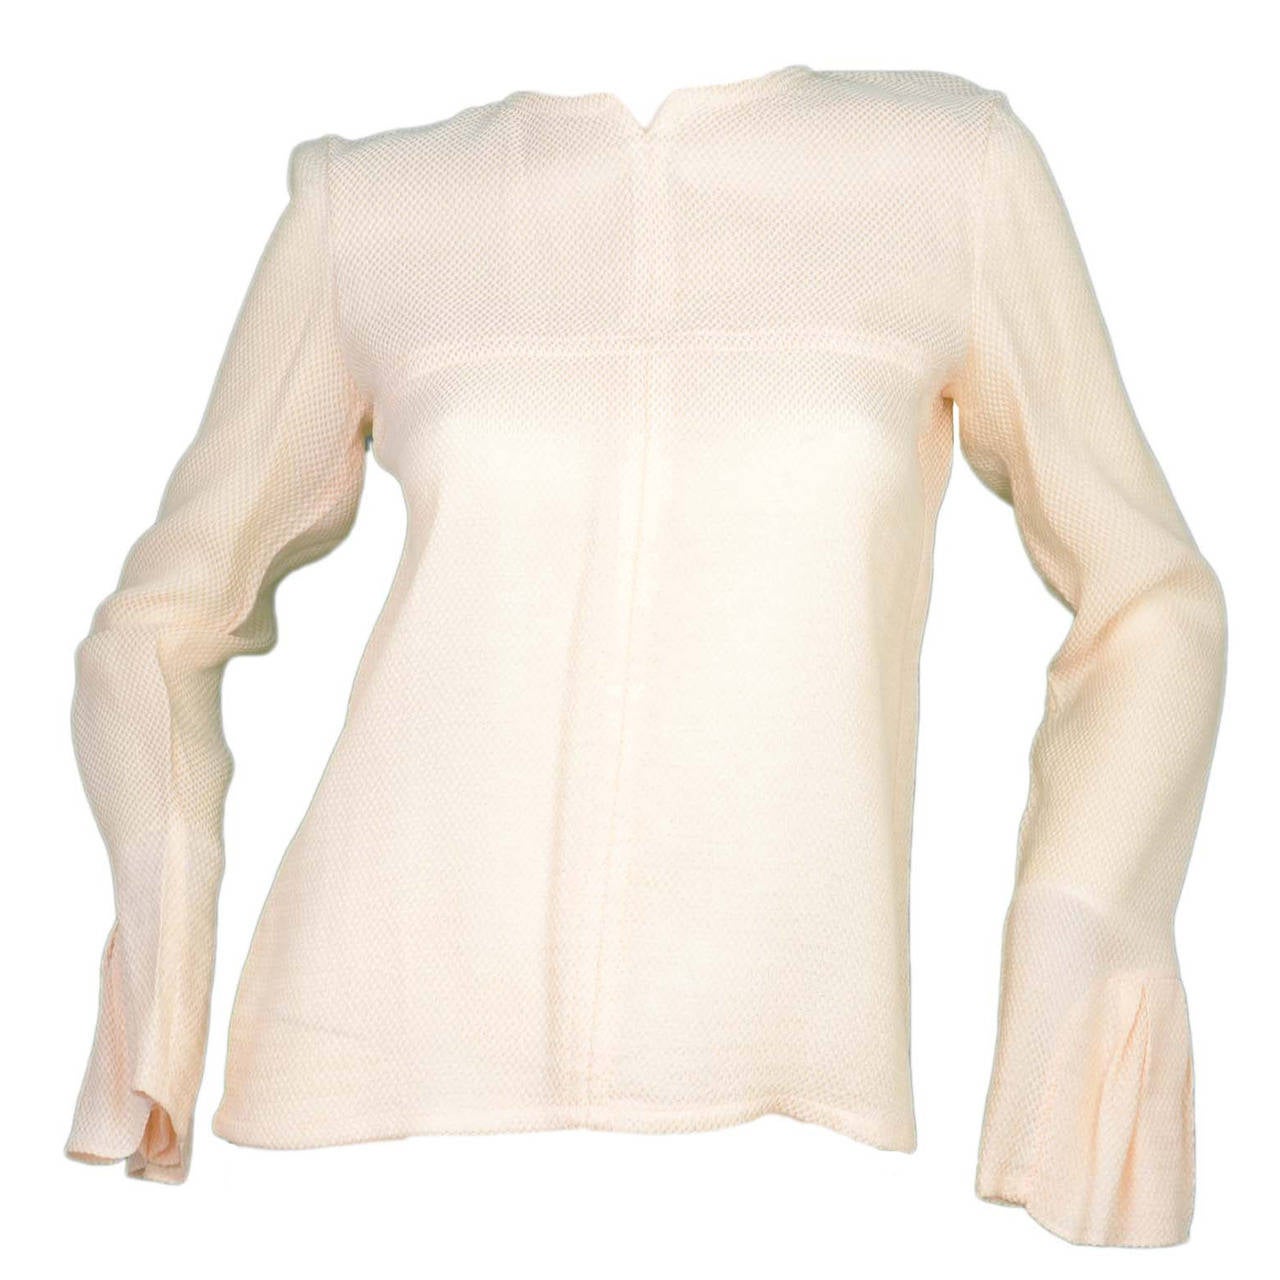 CHANEL Cream Waffle-Print Blouse with Pleated Sleeve Detail sz 38